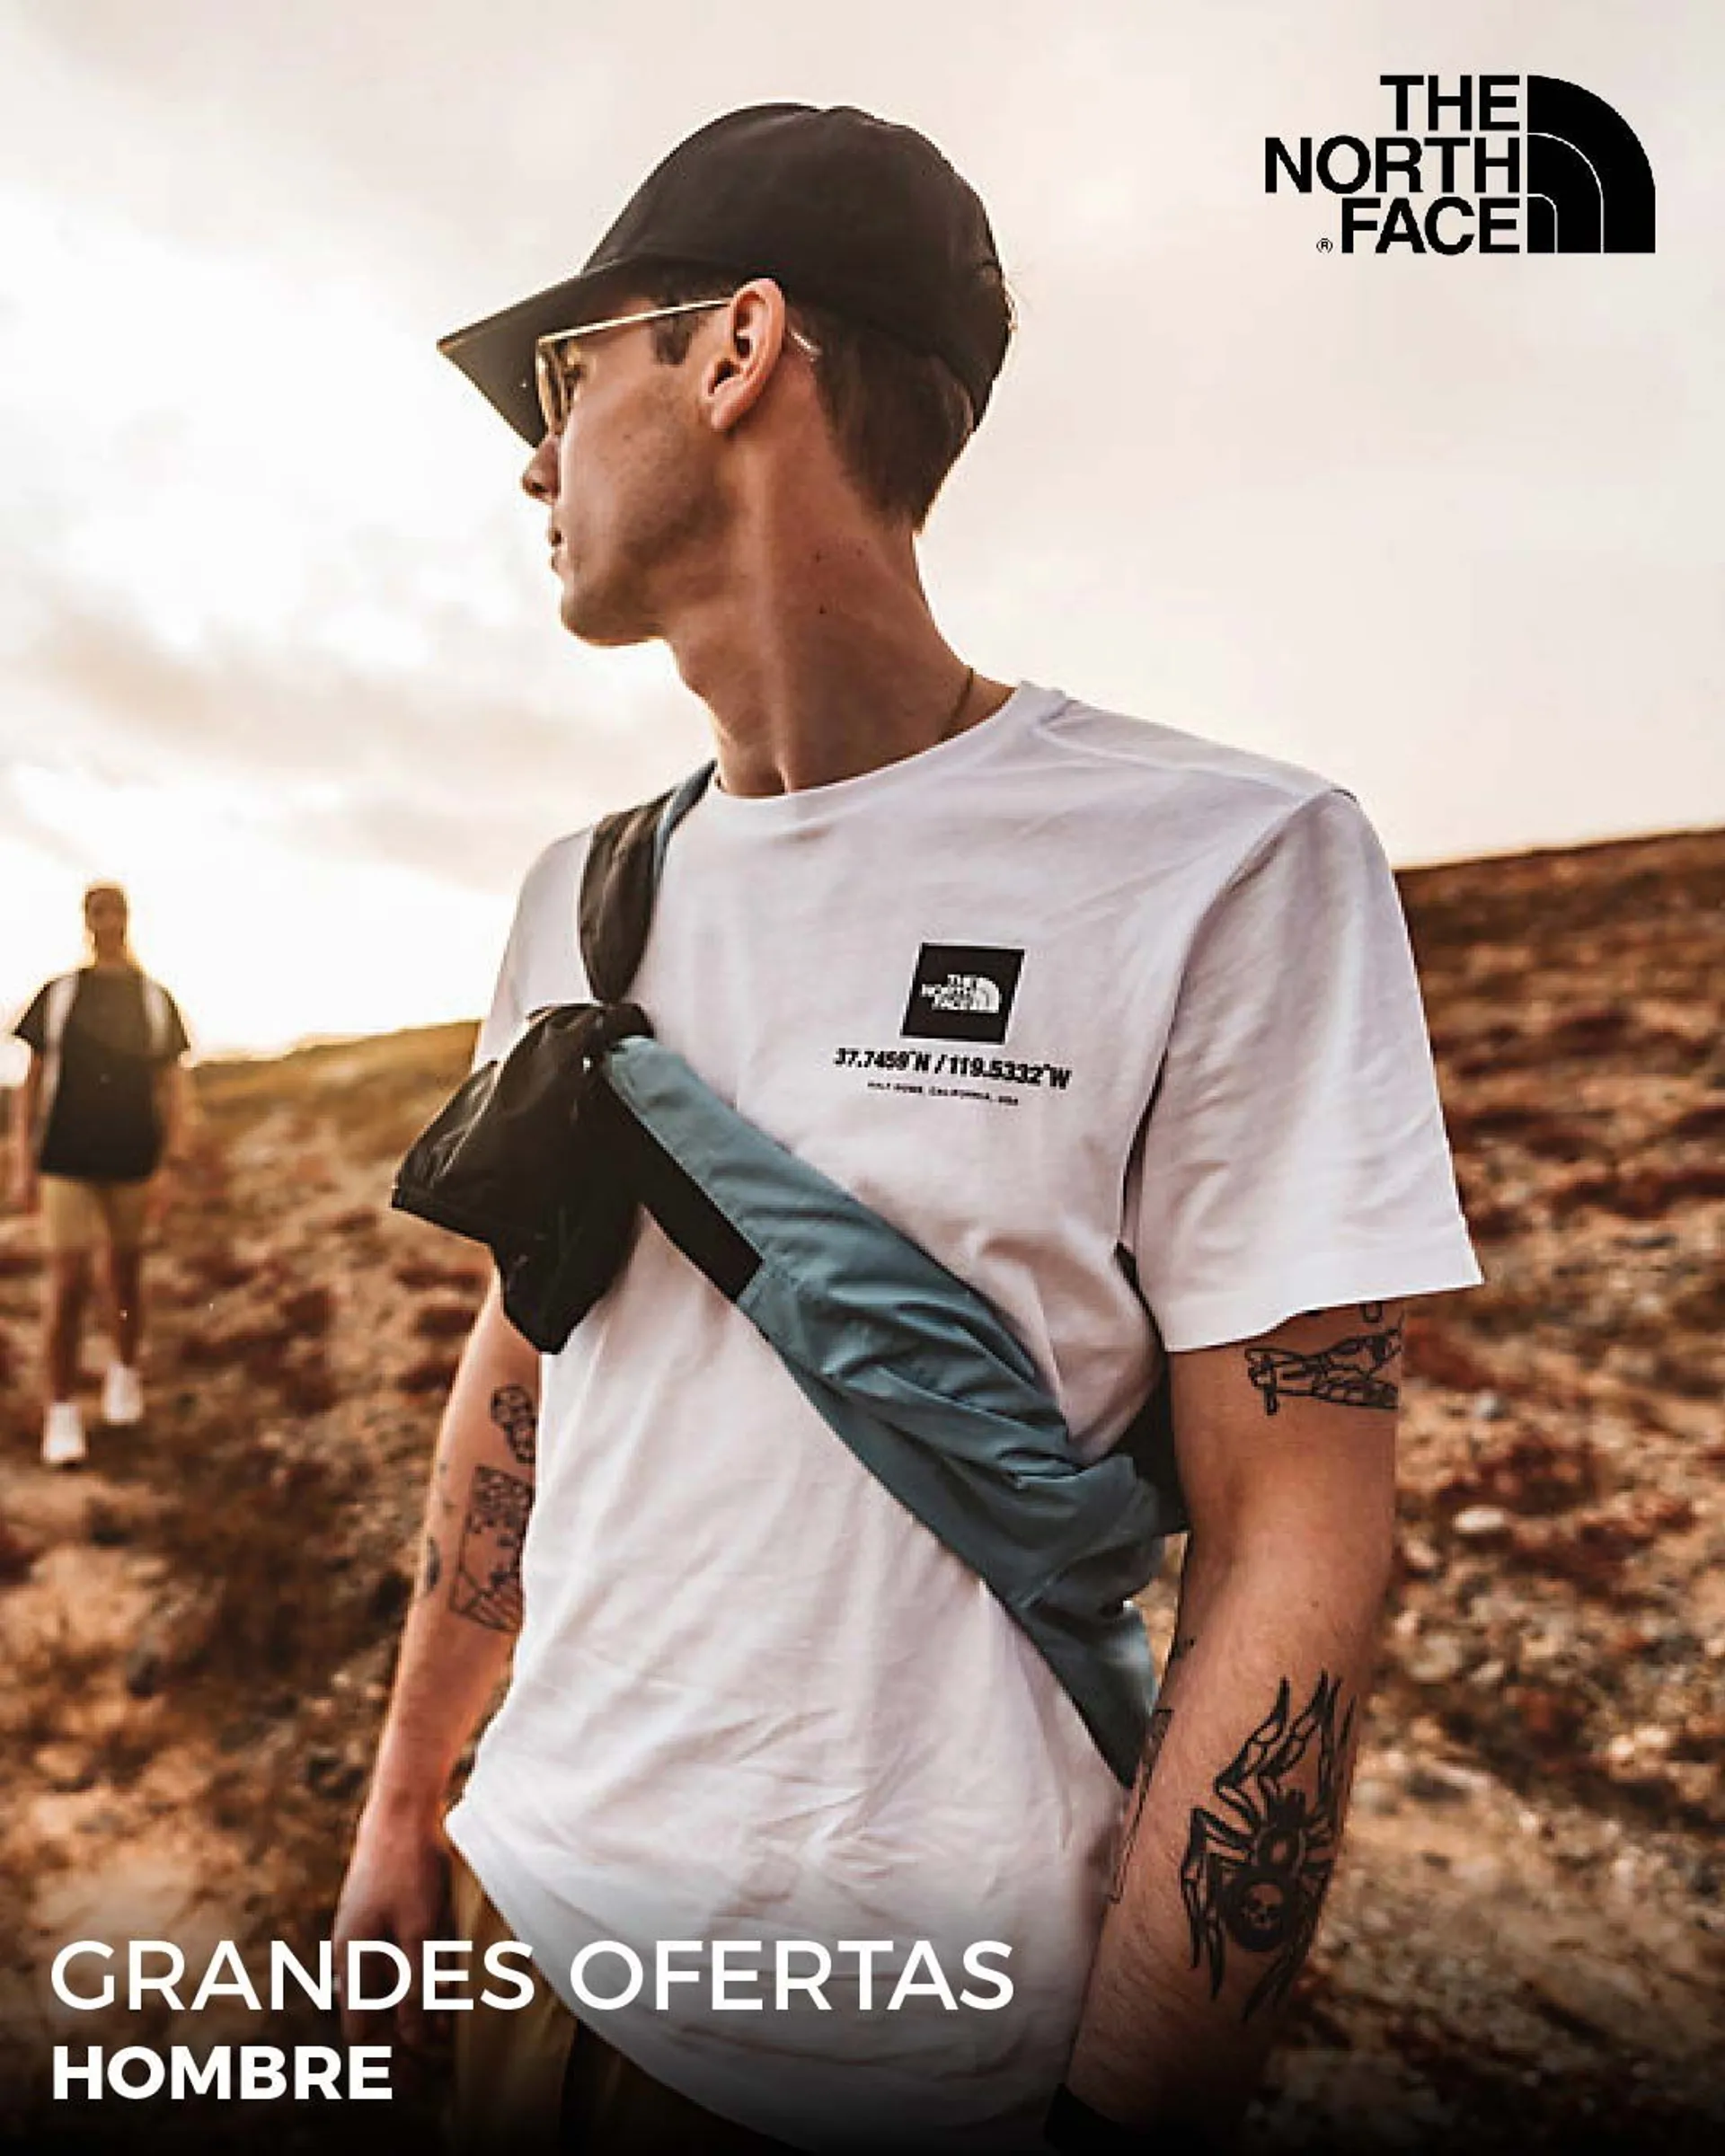 The North Face - Hombre